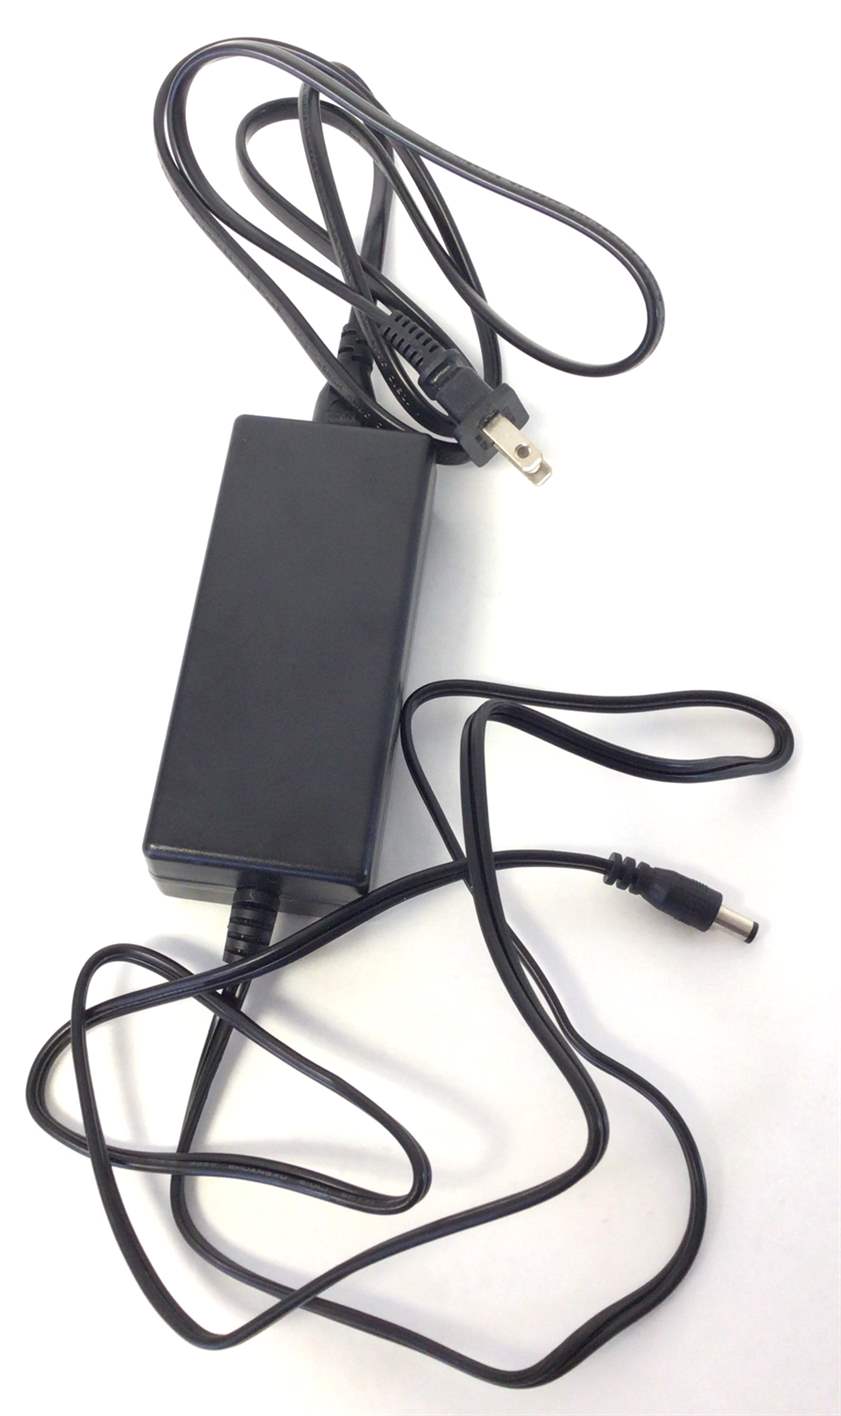 Power Adapter With Cord